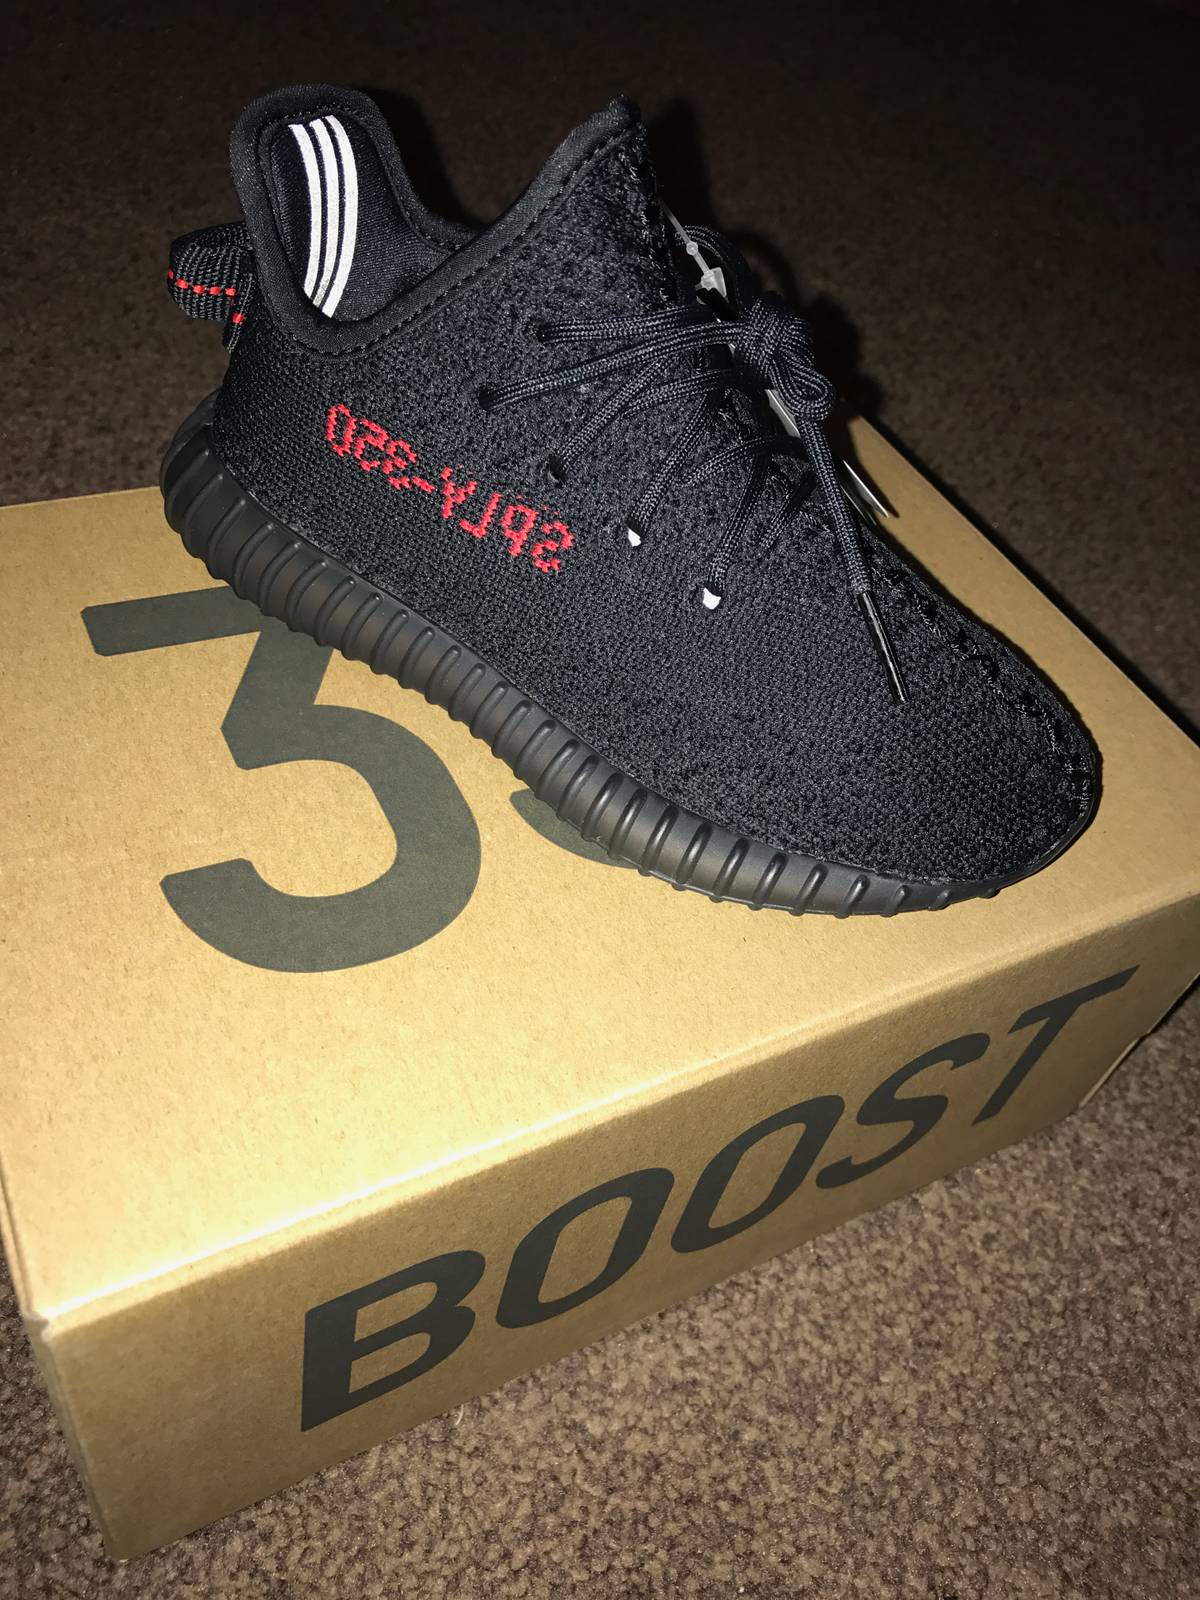 95% Off Yeezy boost 350 V2 black red infant real vs fake canada August